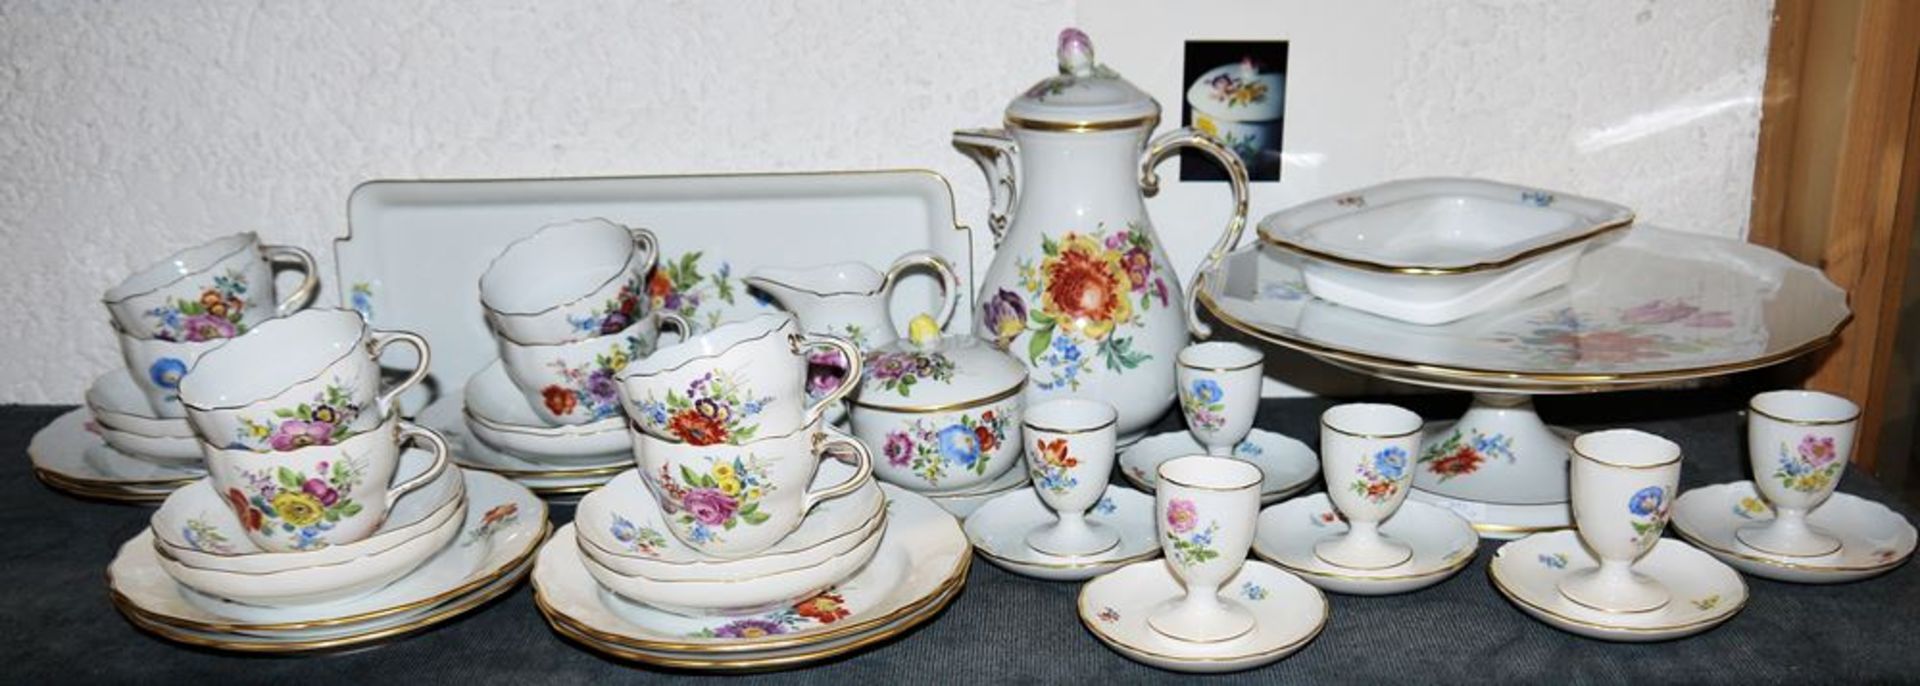 Porcelain coffee service with flowers für 8 persons, Meißen, 1st choice